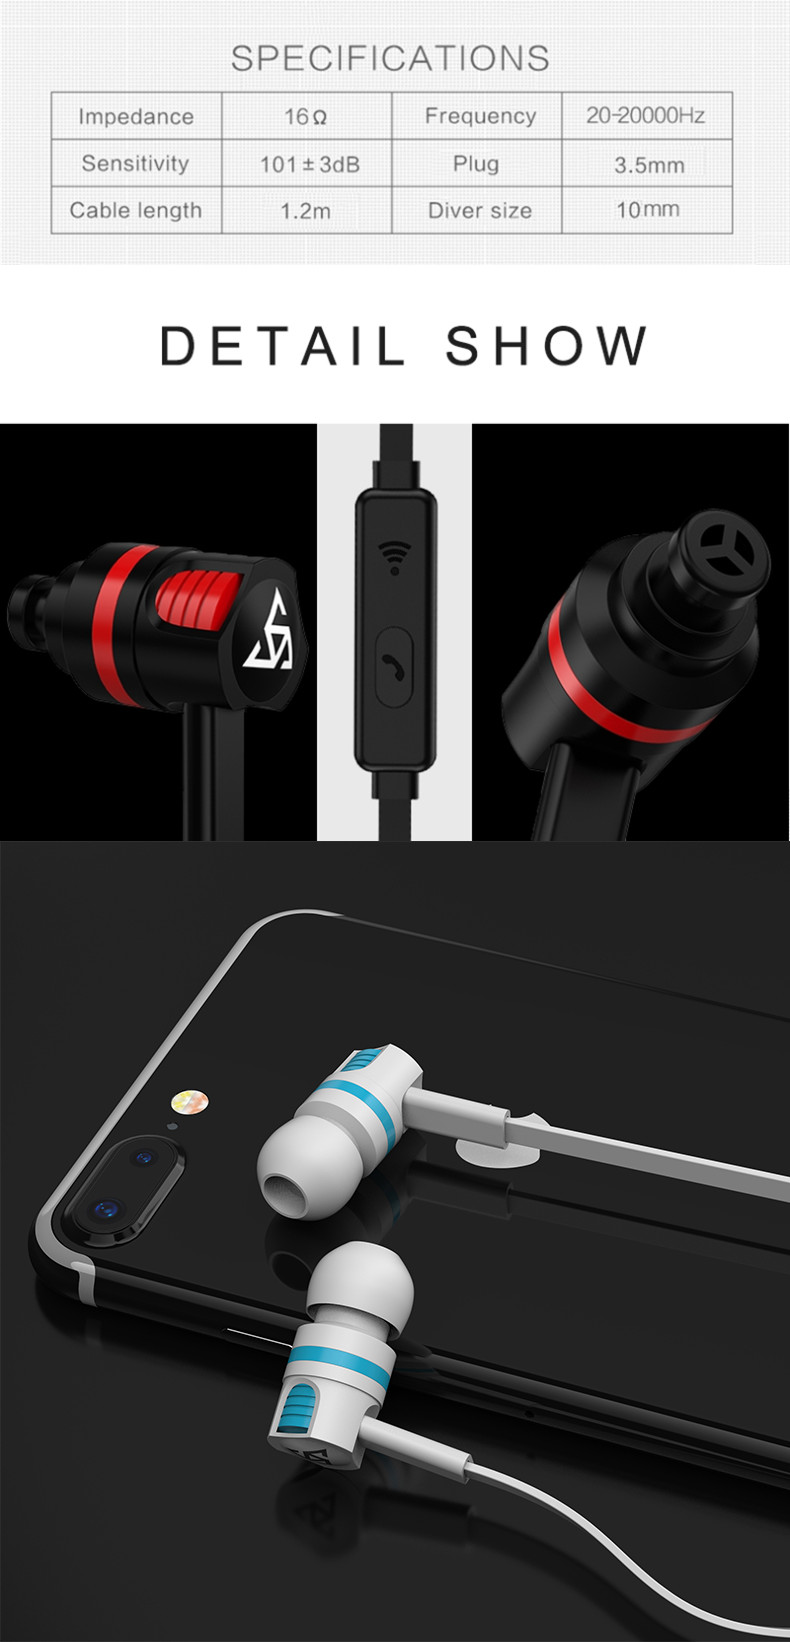 PTM-T2-35mm-In-Ear-Wired-Headset-Super-Bass-Sport-Handsfree-Earphone-With-Mic-for-Phones-PC-MP3-1429710-6